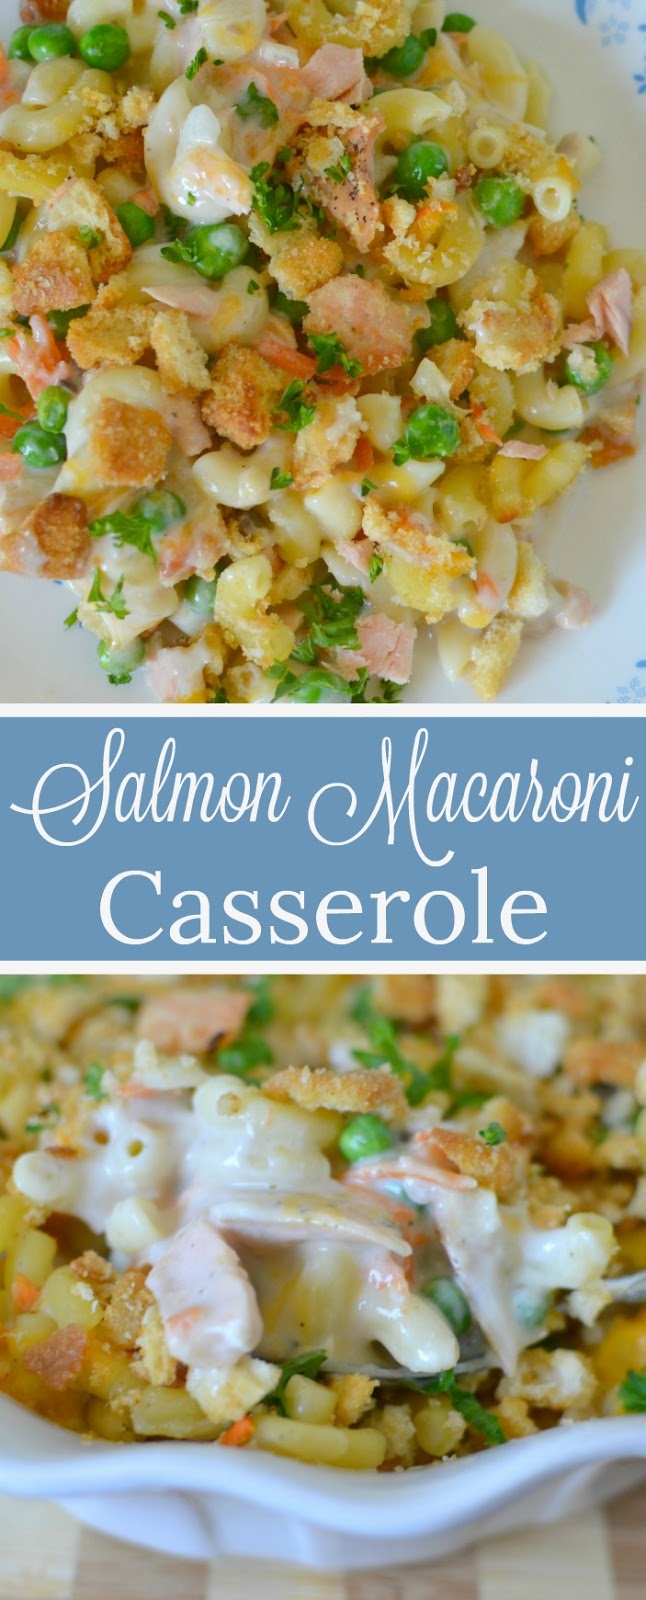 Salmon Macaroni Casserole Recipe from Hot Eats and Cool Reads! This delicious and family friendly comfort food casserole can be on the table in an hour! Use canned salmon, leftover cooked salmon fillets or even give tuna a try!